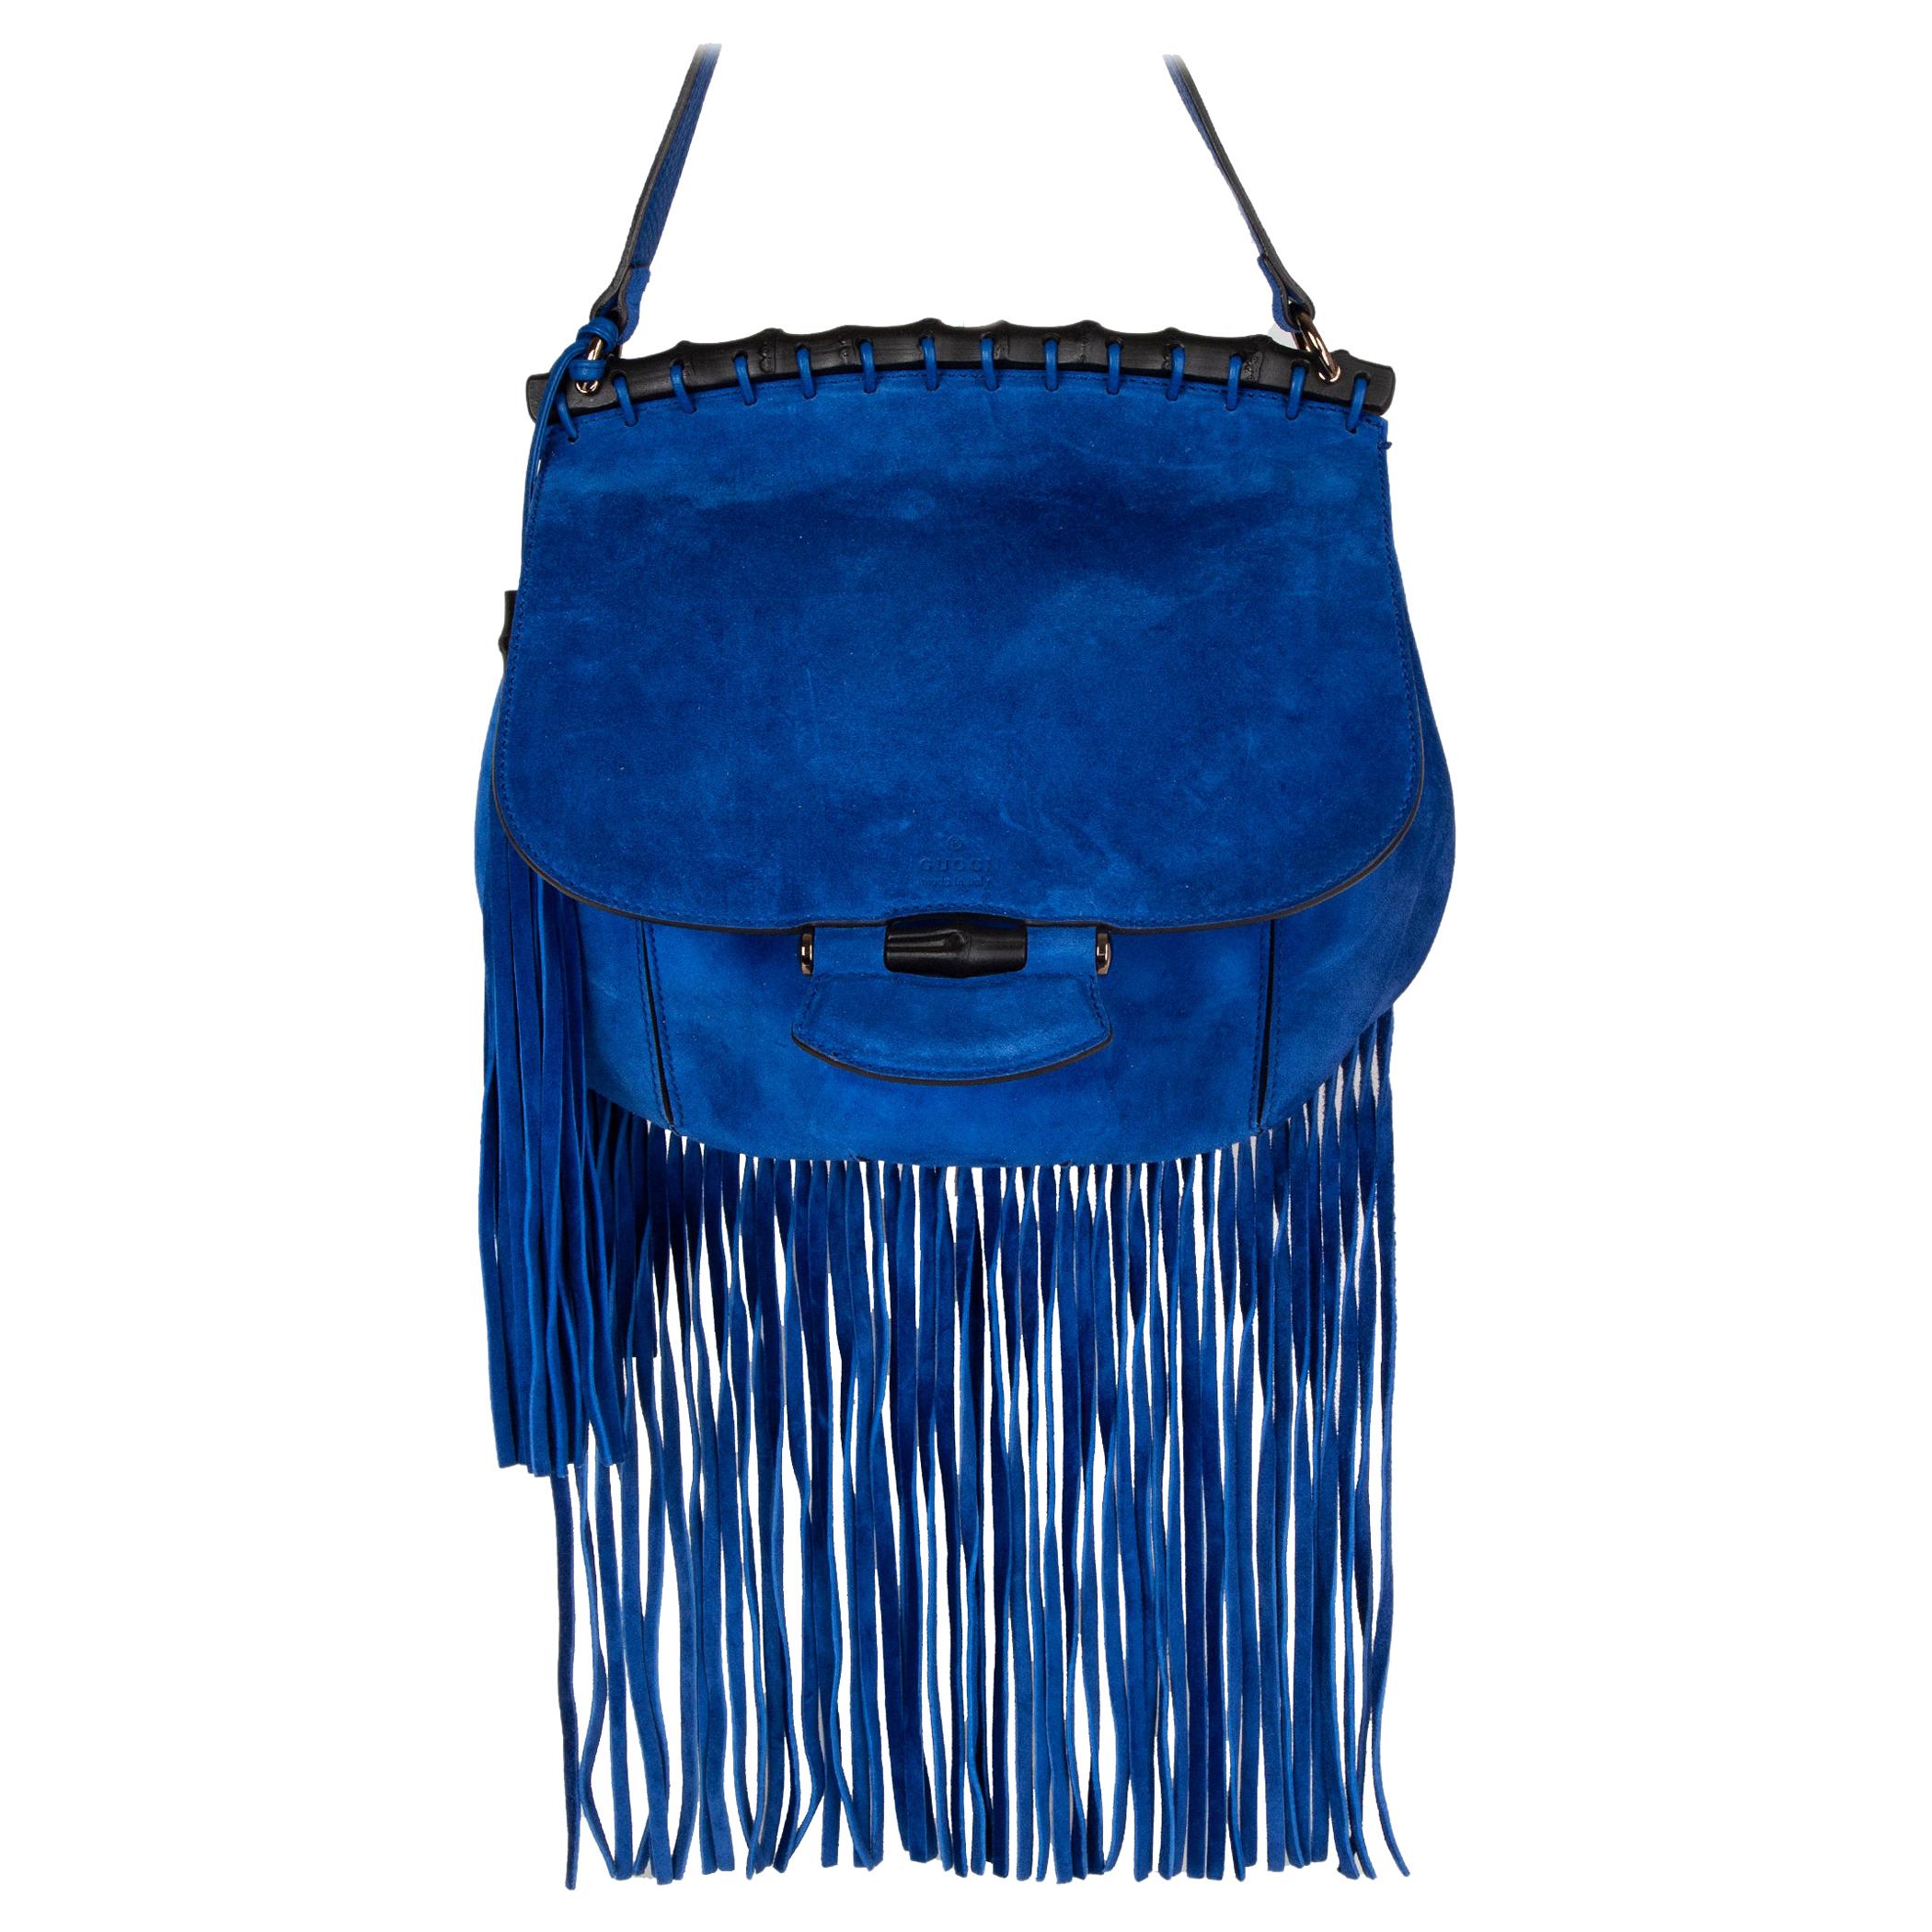 GUCCI royal blue suede FRINGE BAMBOO 